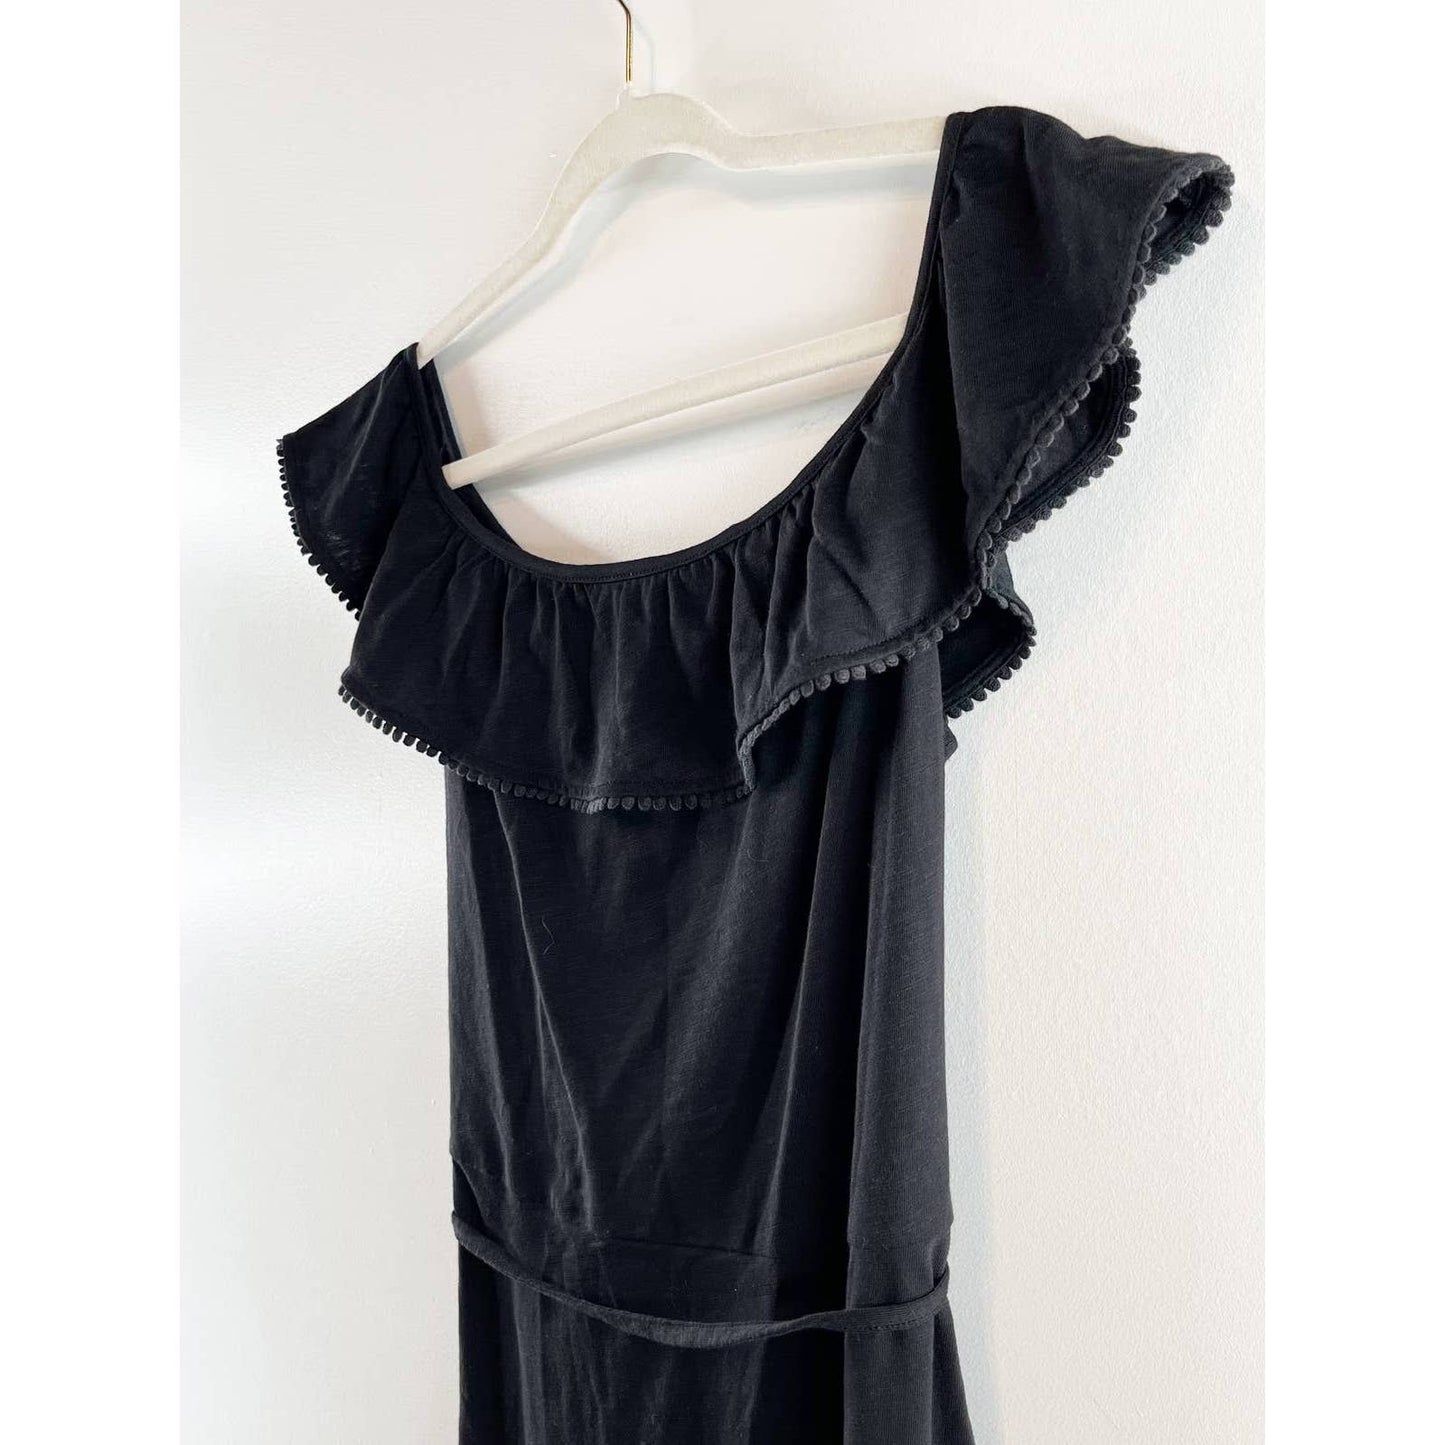 Boden Bethany Ruffled Off The Shoulder Cotton Dress Black 8 Long